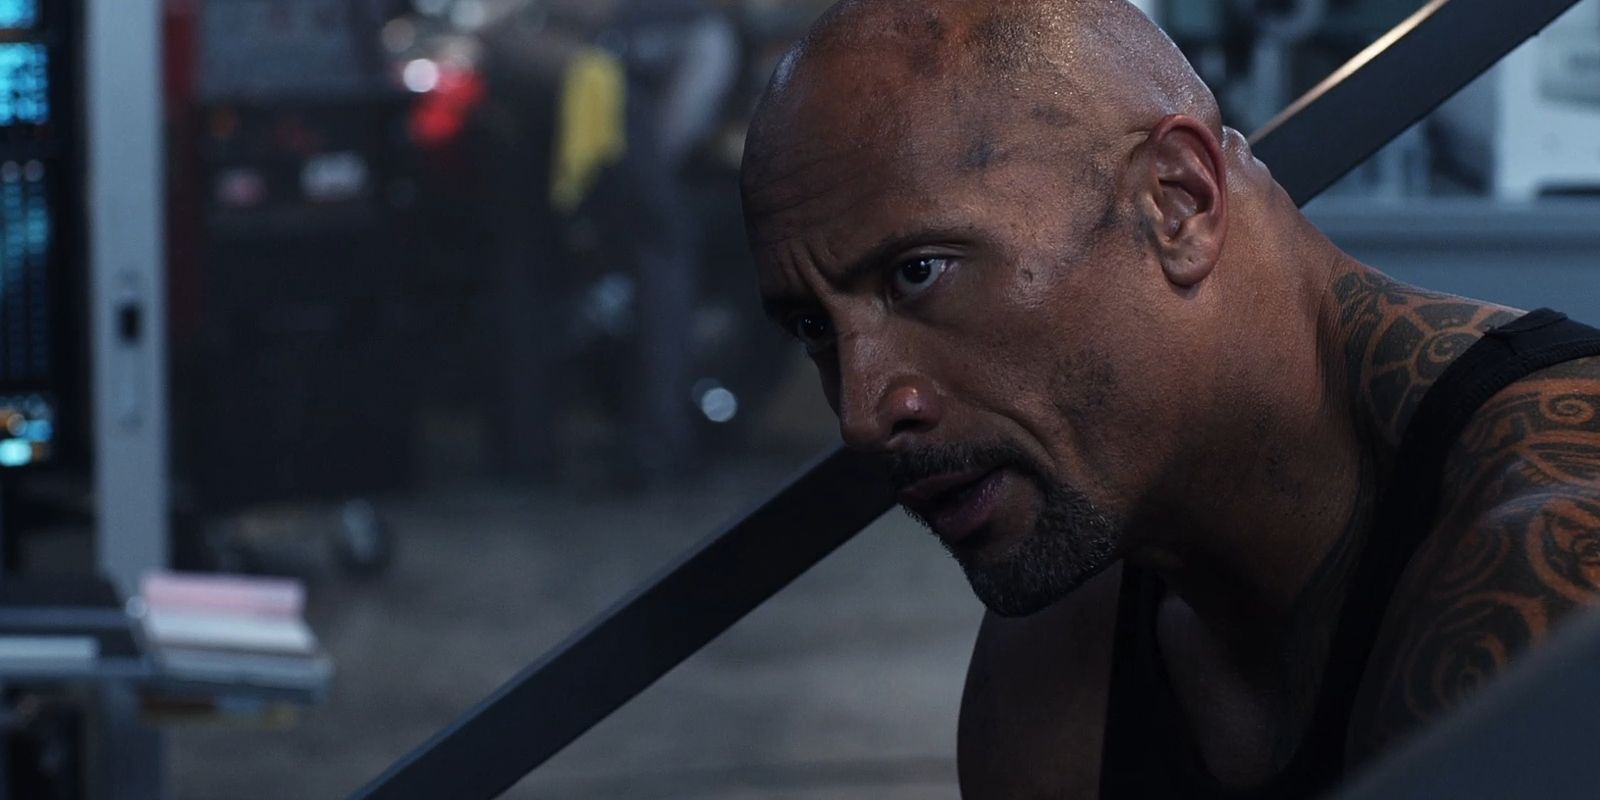 Hobbs Leads the Crew in Fate of the Furious